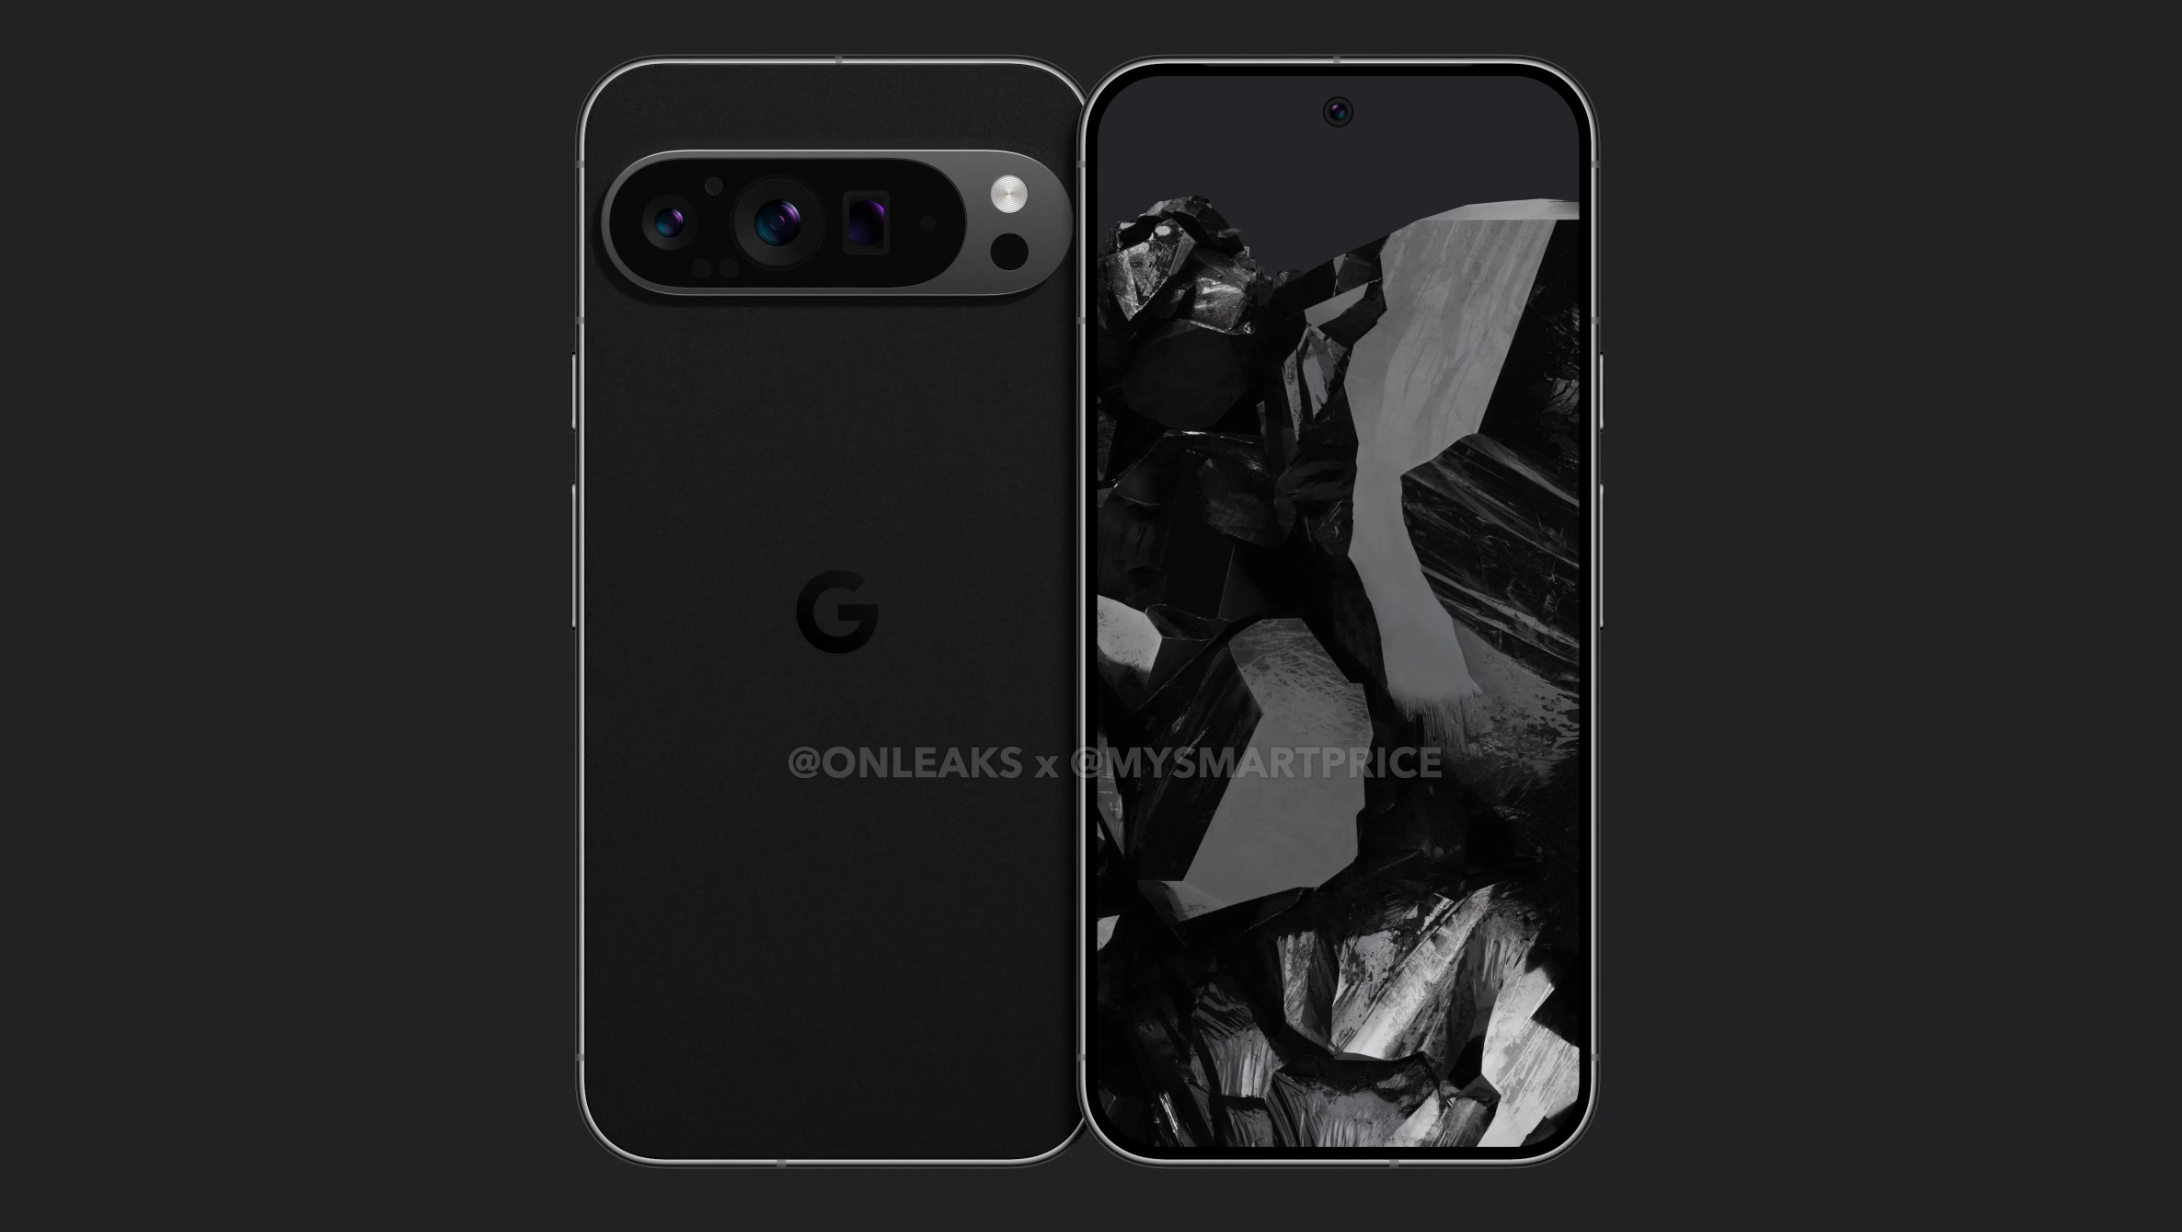 Leaked Google Pixel 9 Pro Design Disappoints: Here’s What’s Wrong